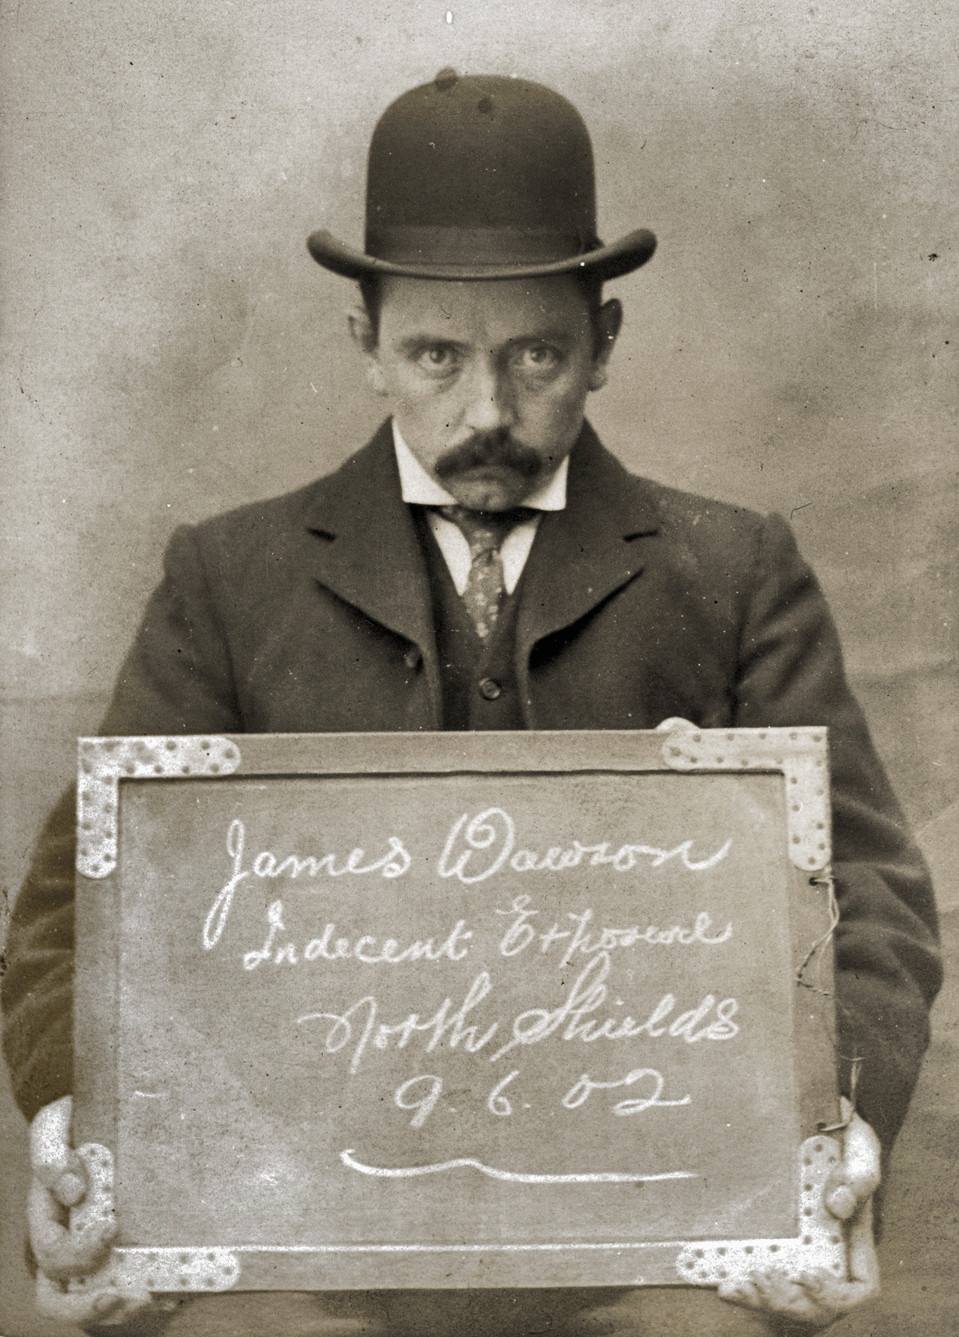 "James Dawson, arrested for Indecent Exposure. North Shields Police Station, 9th June 1902." Our first image from a photograph album of prisoners brought before the North Shields Police Court in England between 1902 and 1916, now in the collection of the Tyne & Wear Archives and Museums. View full size.